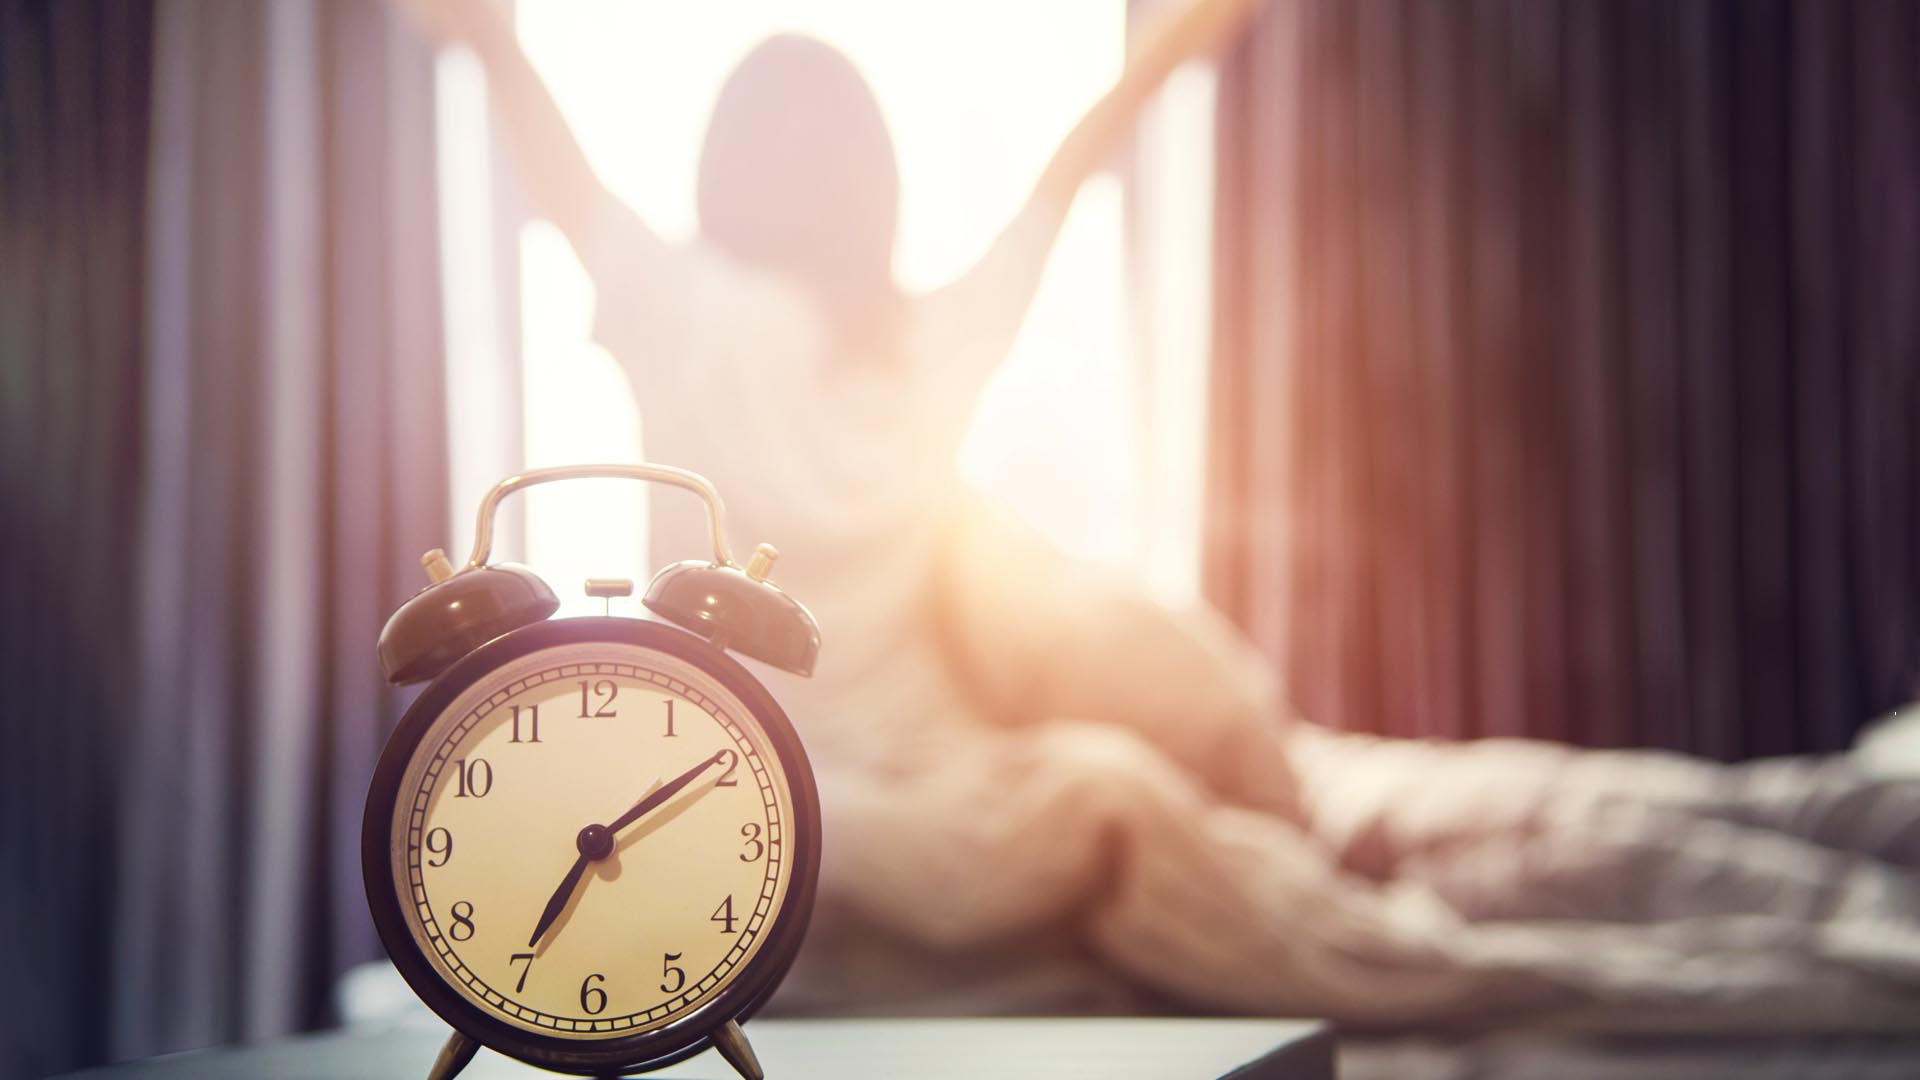 7 tips for a healthy morning routine